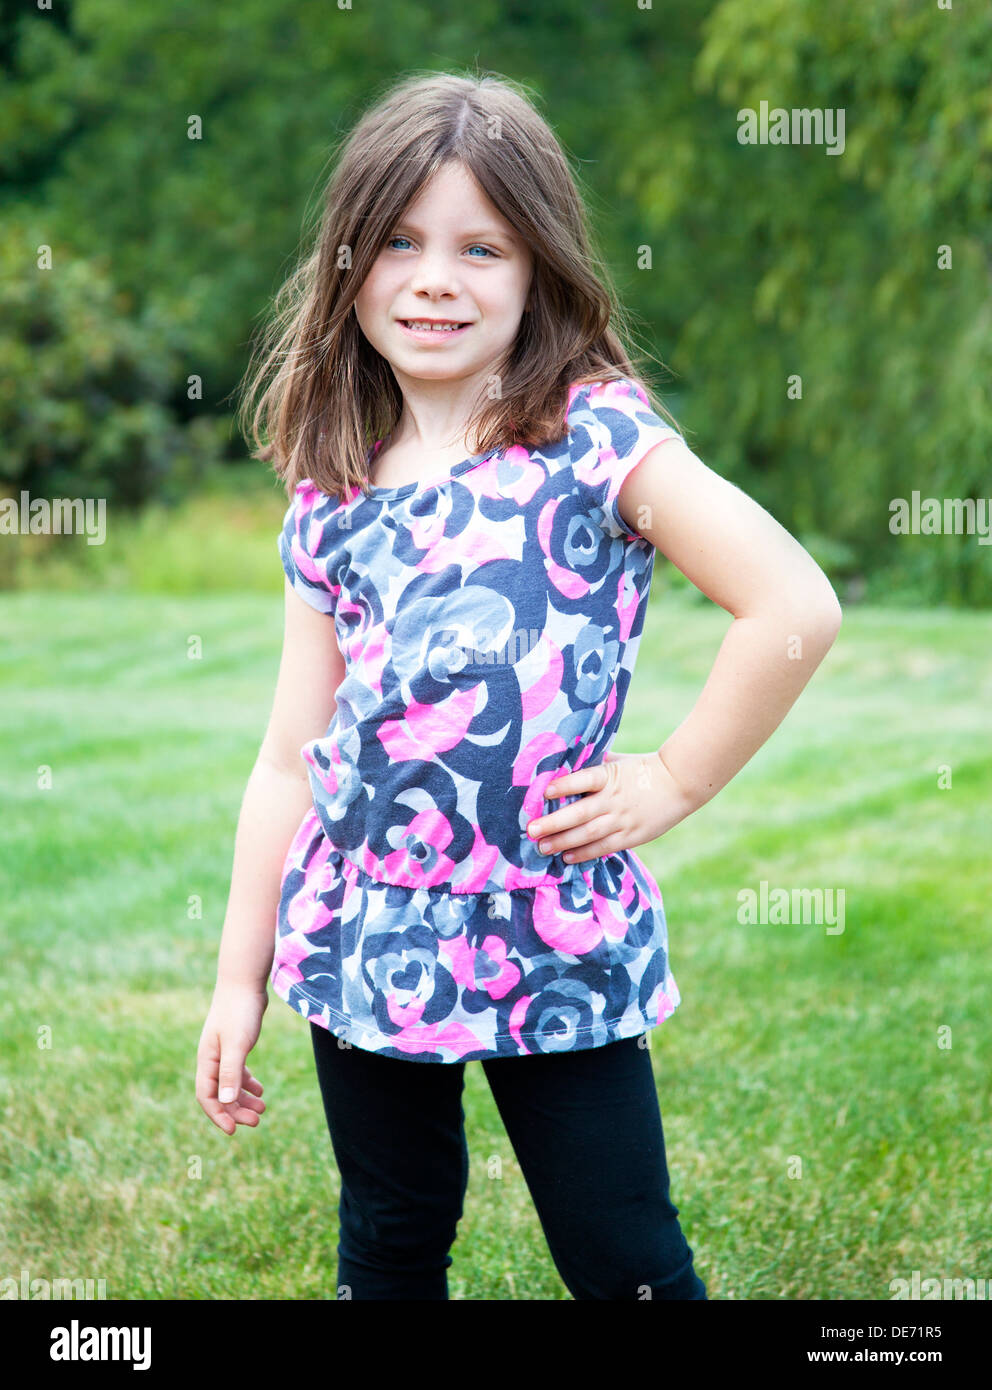 Pretty young girl portrait smiling outdoors Stock Photo